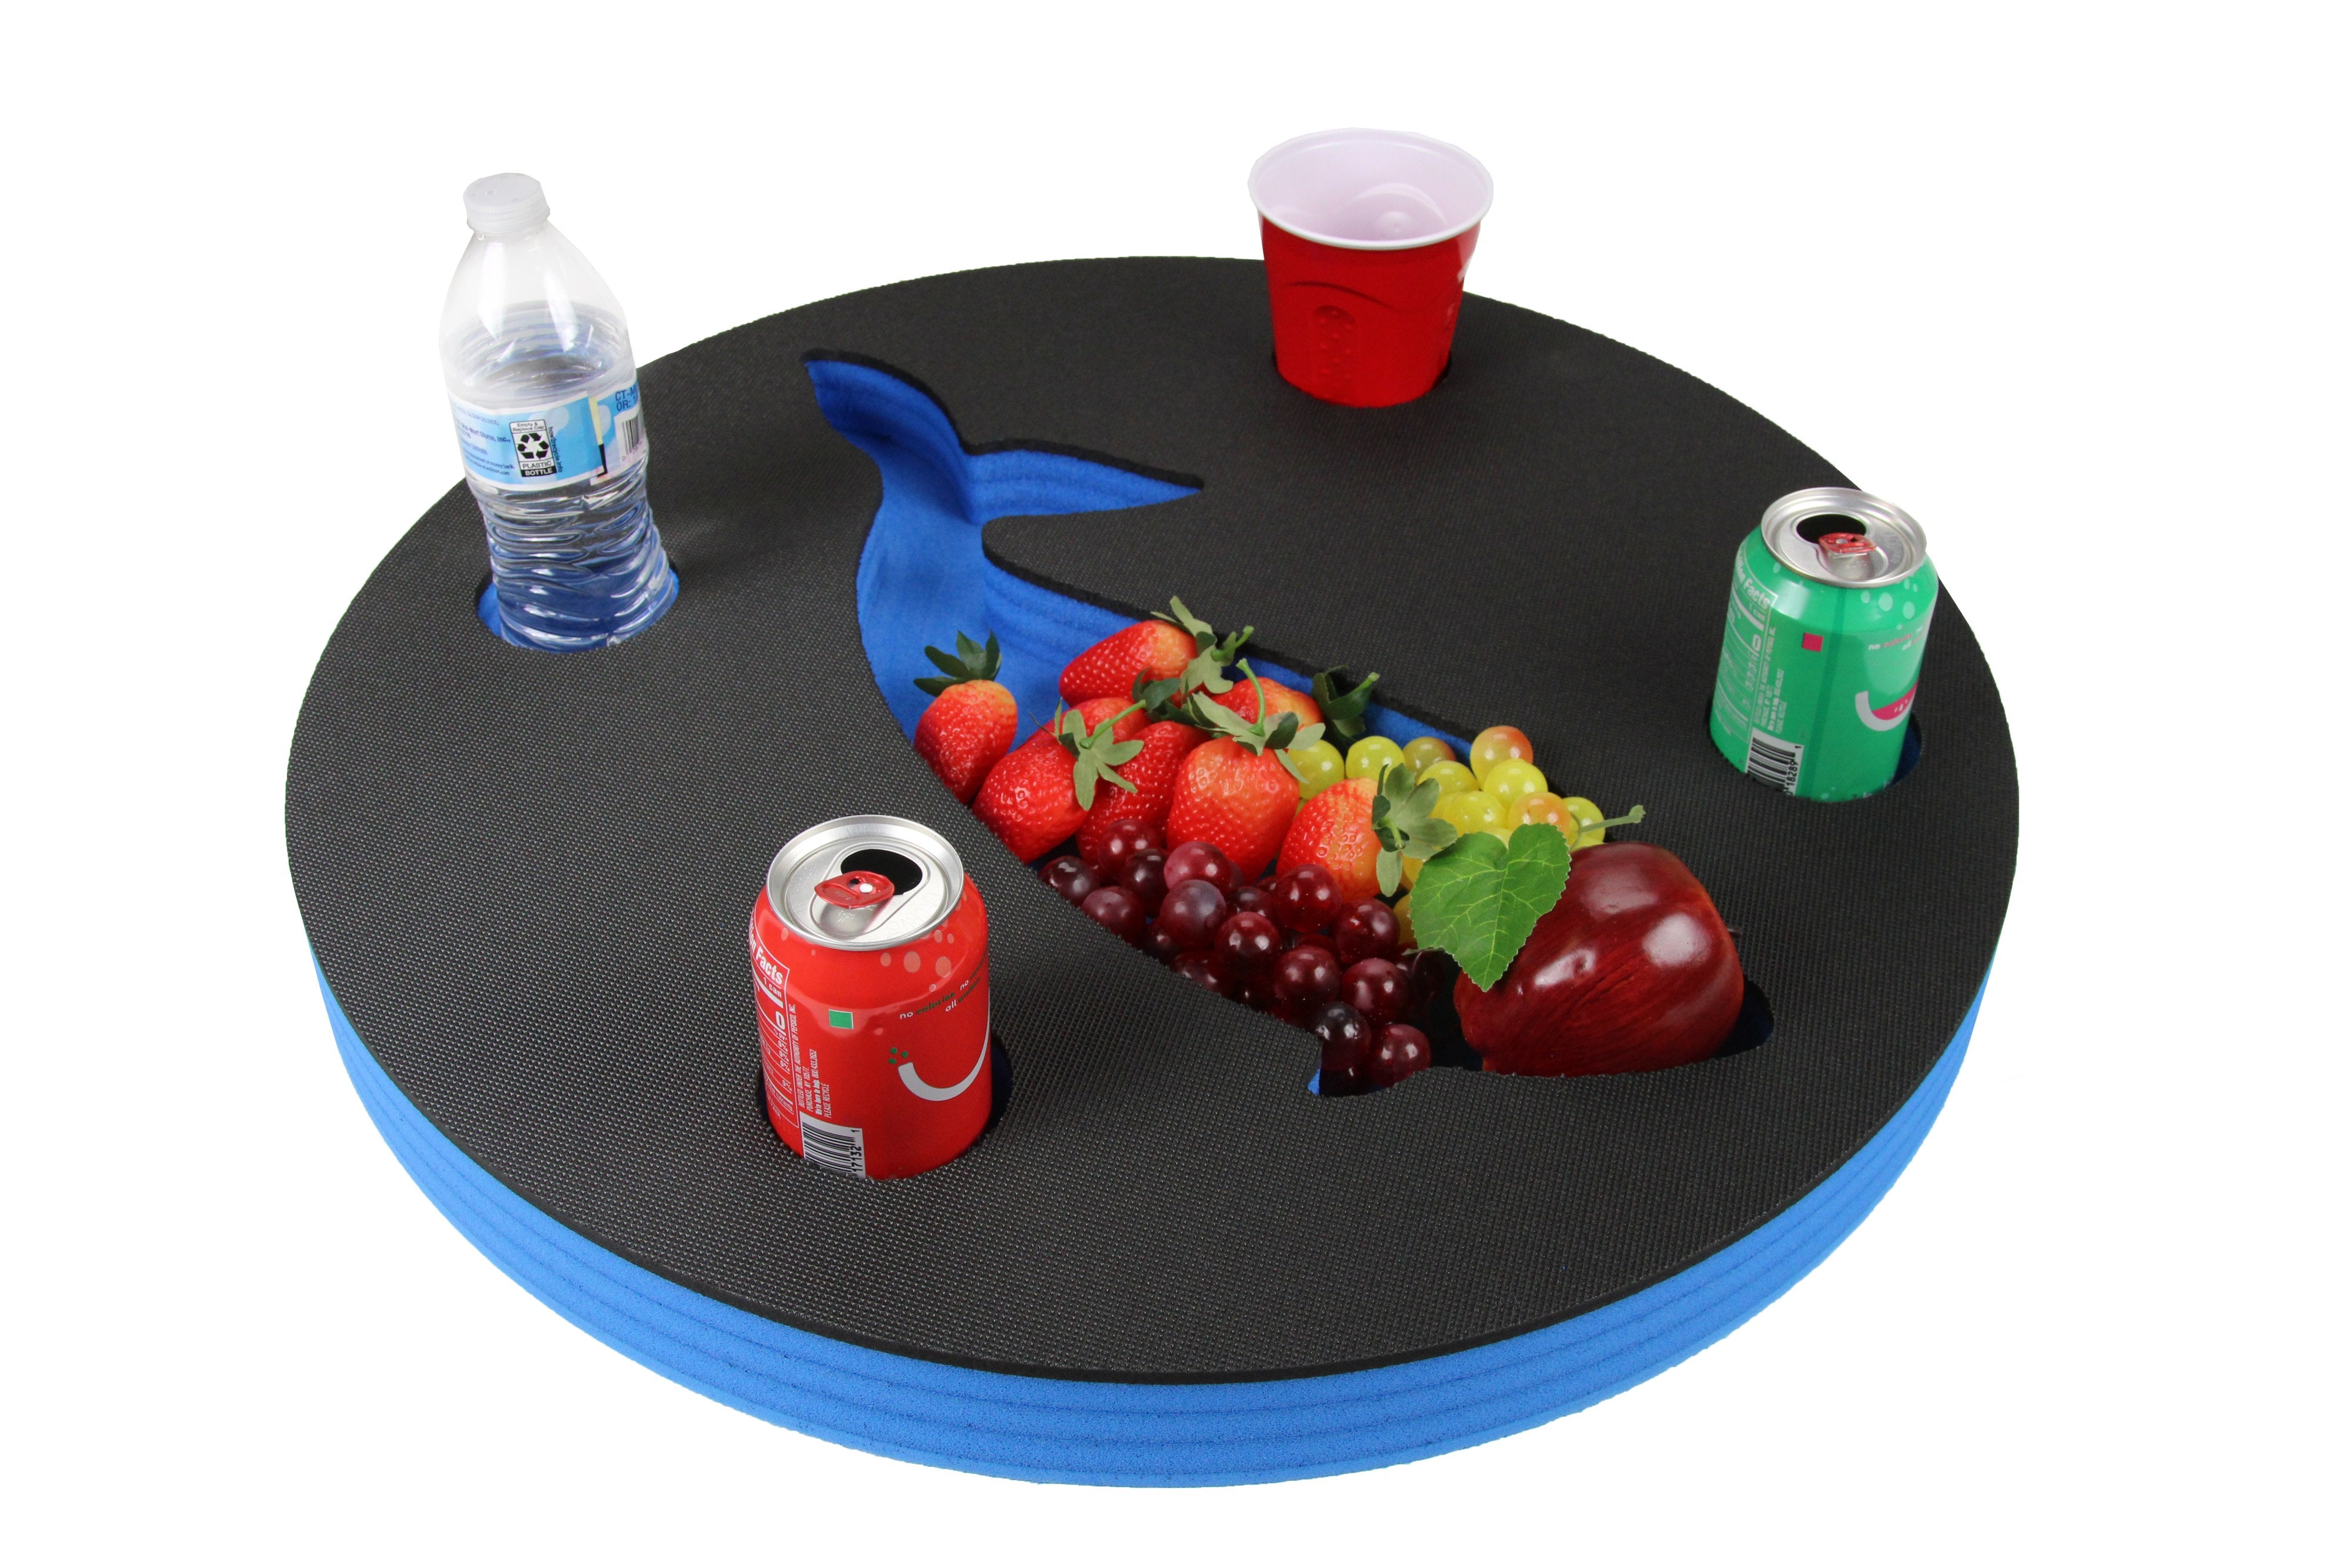 Whale Shape Drink Holder Doughnut Refreshment Table Tray PoolBeach Party Float Lounge Durable Foam 5 Compartment UV Resistant Cup Holders 2 Feet